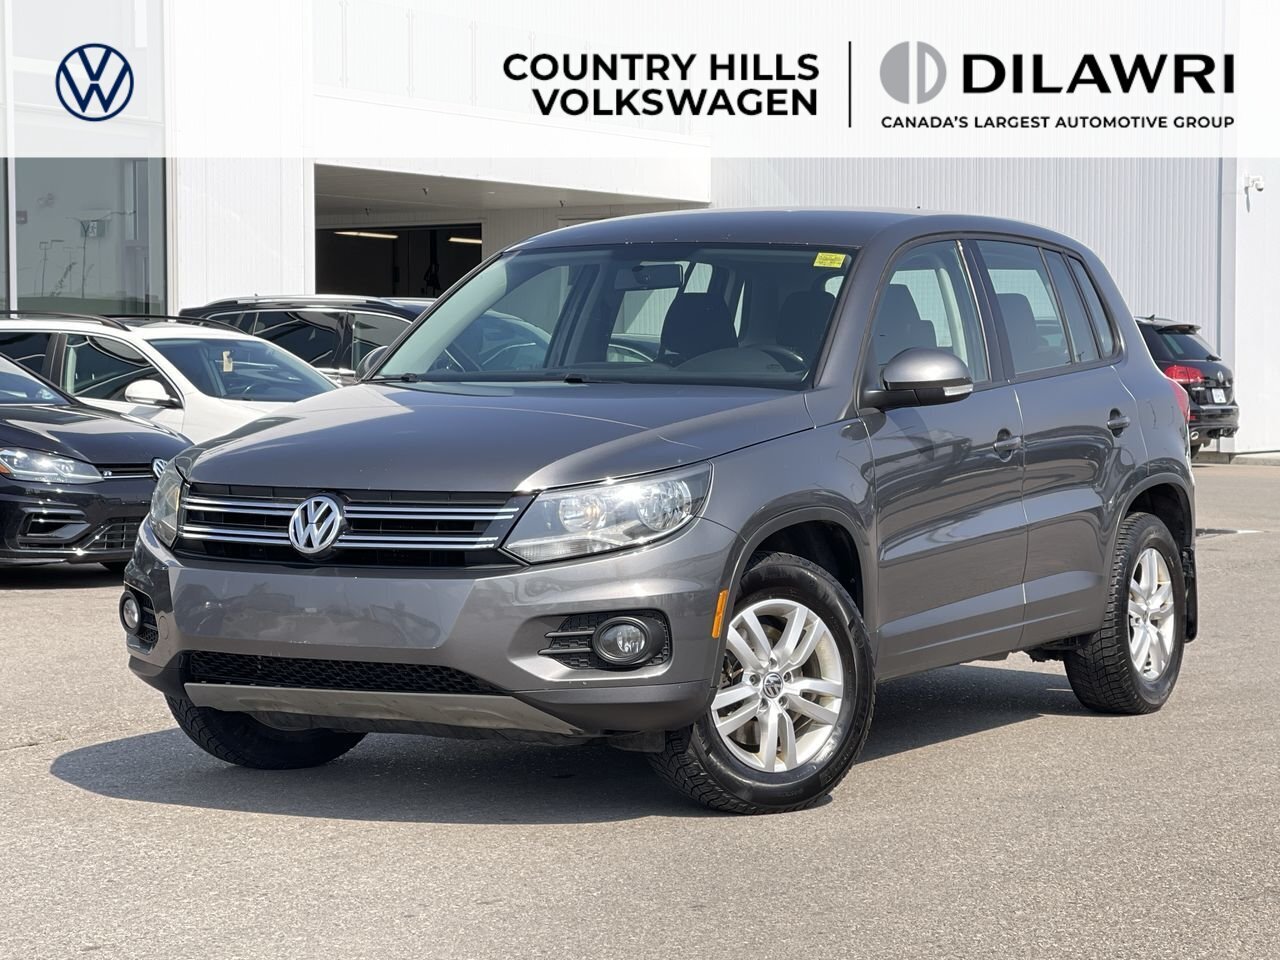 2014 Volkswagen Tiguan Trendline AWD 2.0L TSI Locally Owned/One Owner / 